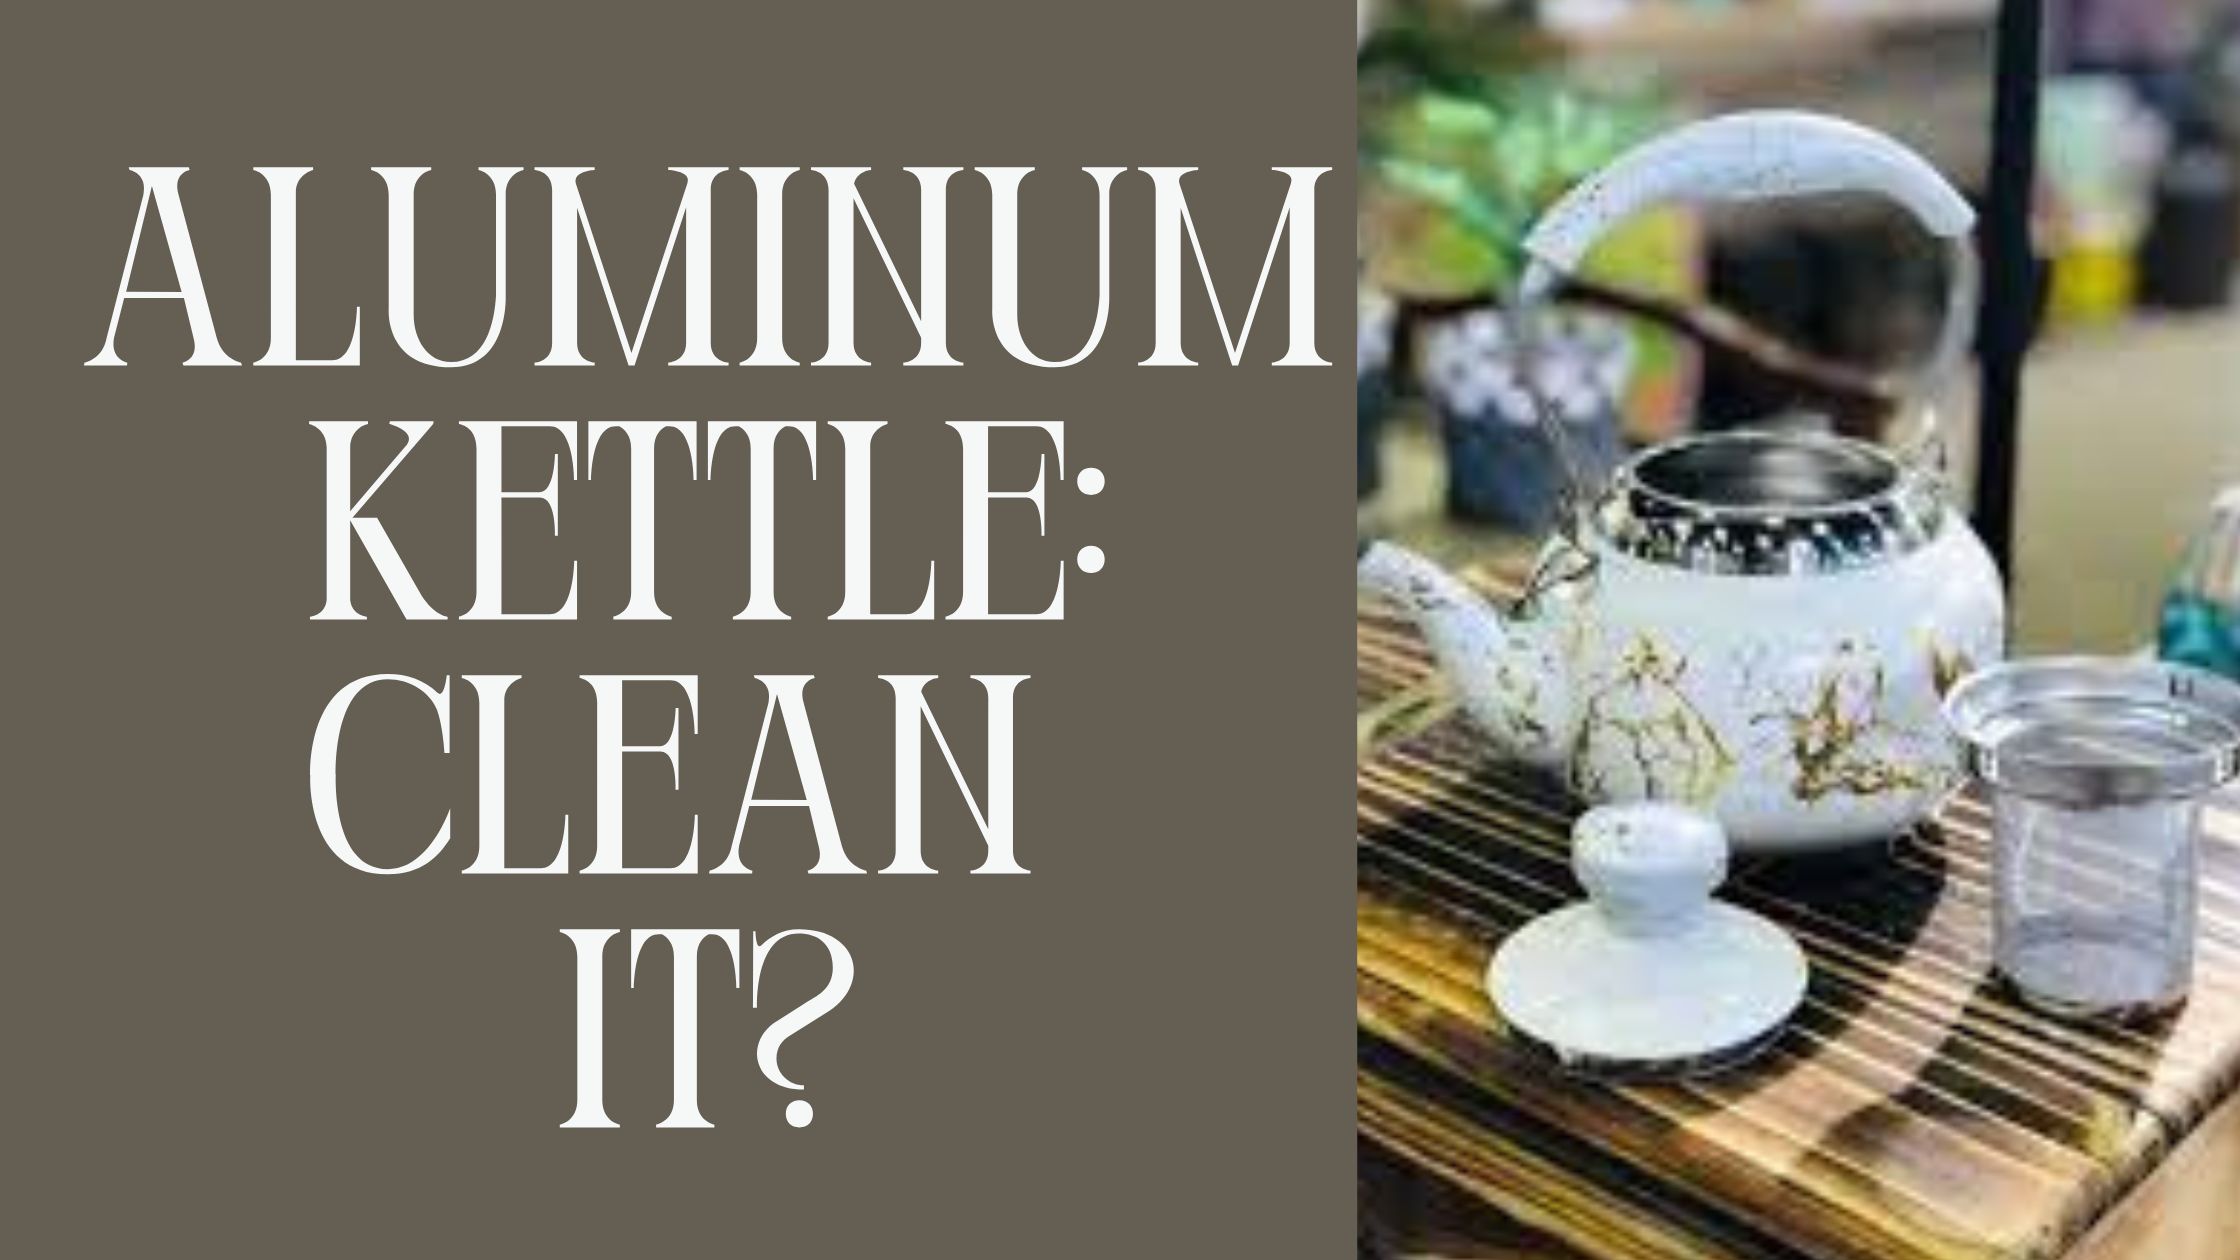 How To Clean Aluminum Kettle